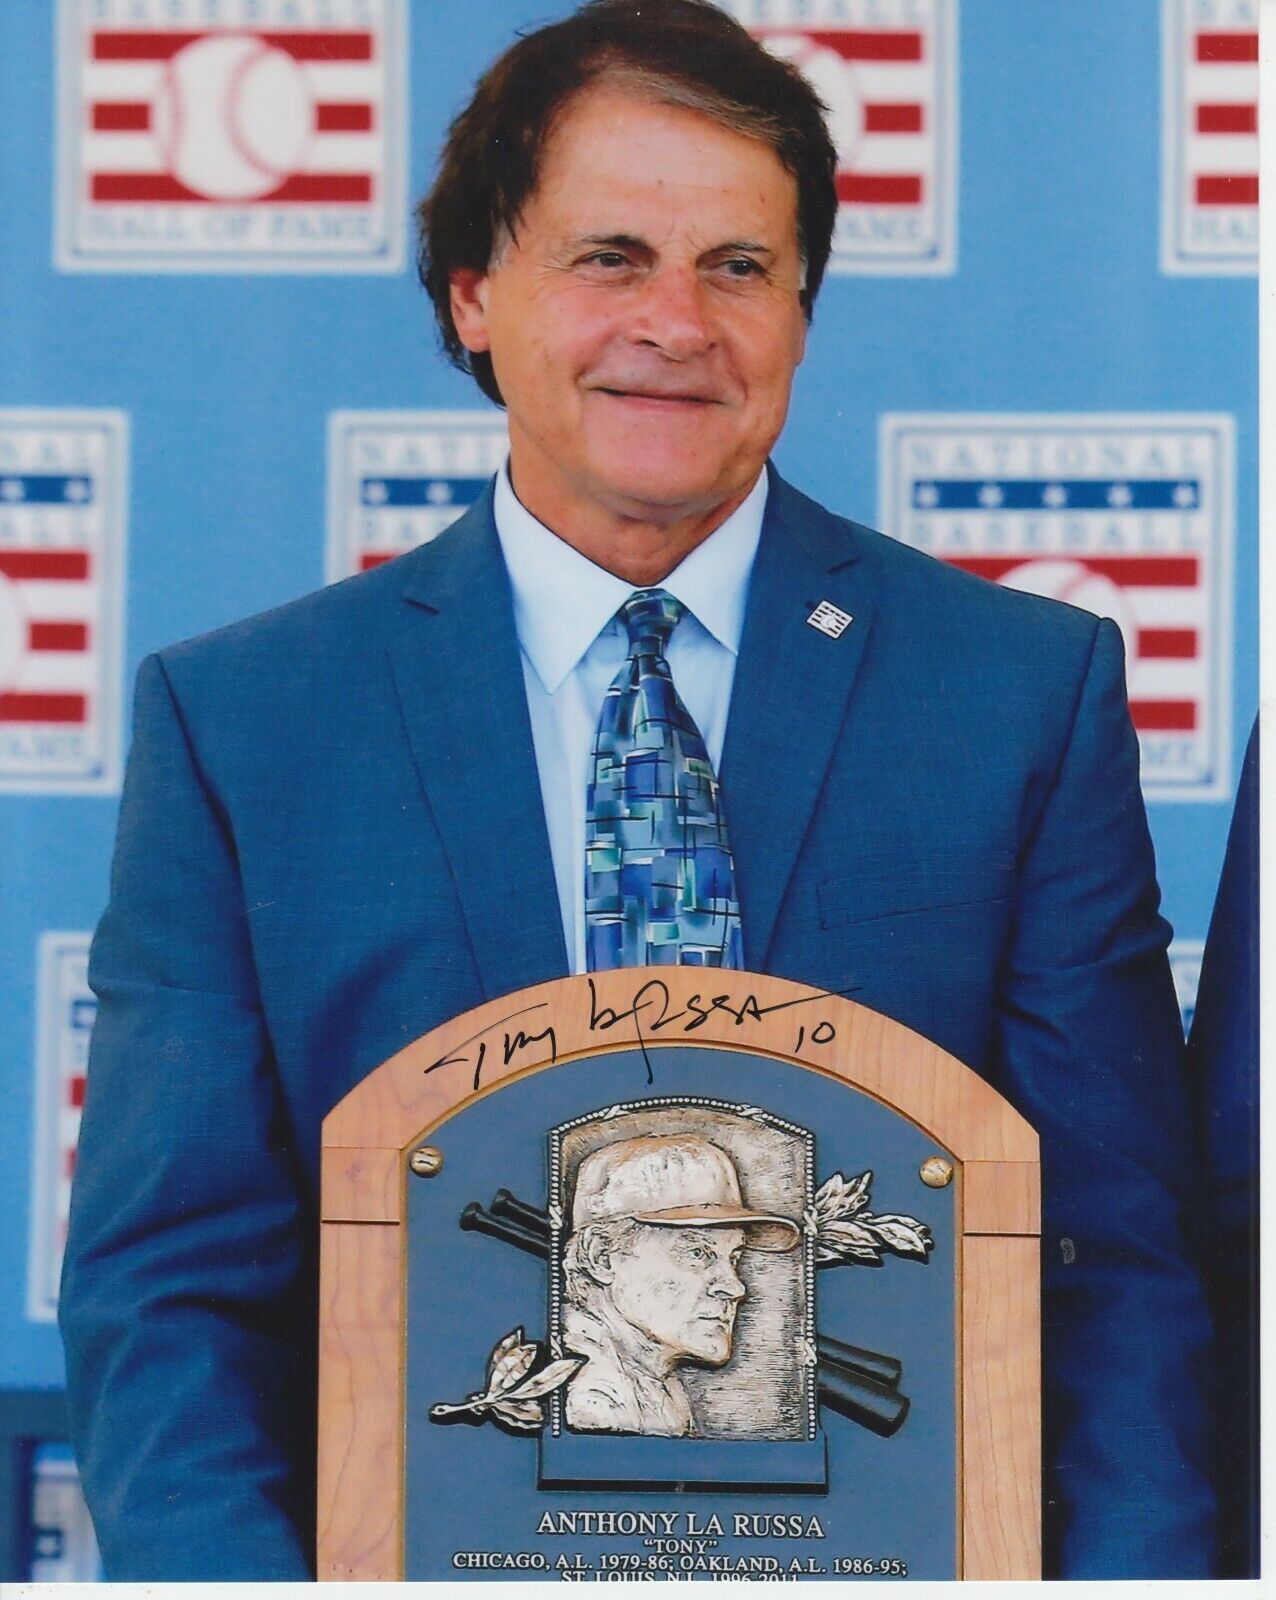 Tony LaRussa 8x10 Signed Photo Poster painting w/ COA St. Louis Cardinals #1